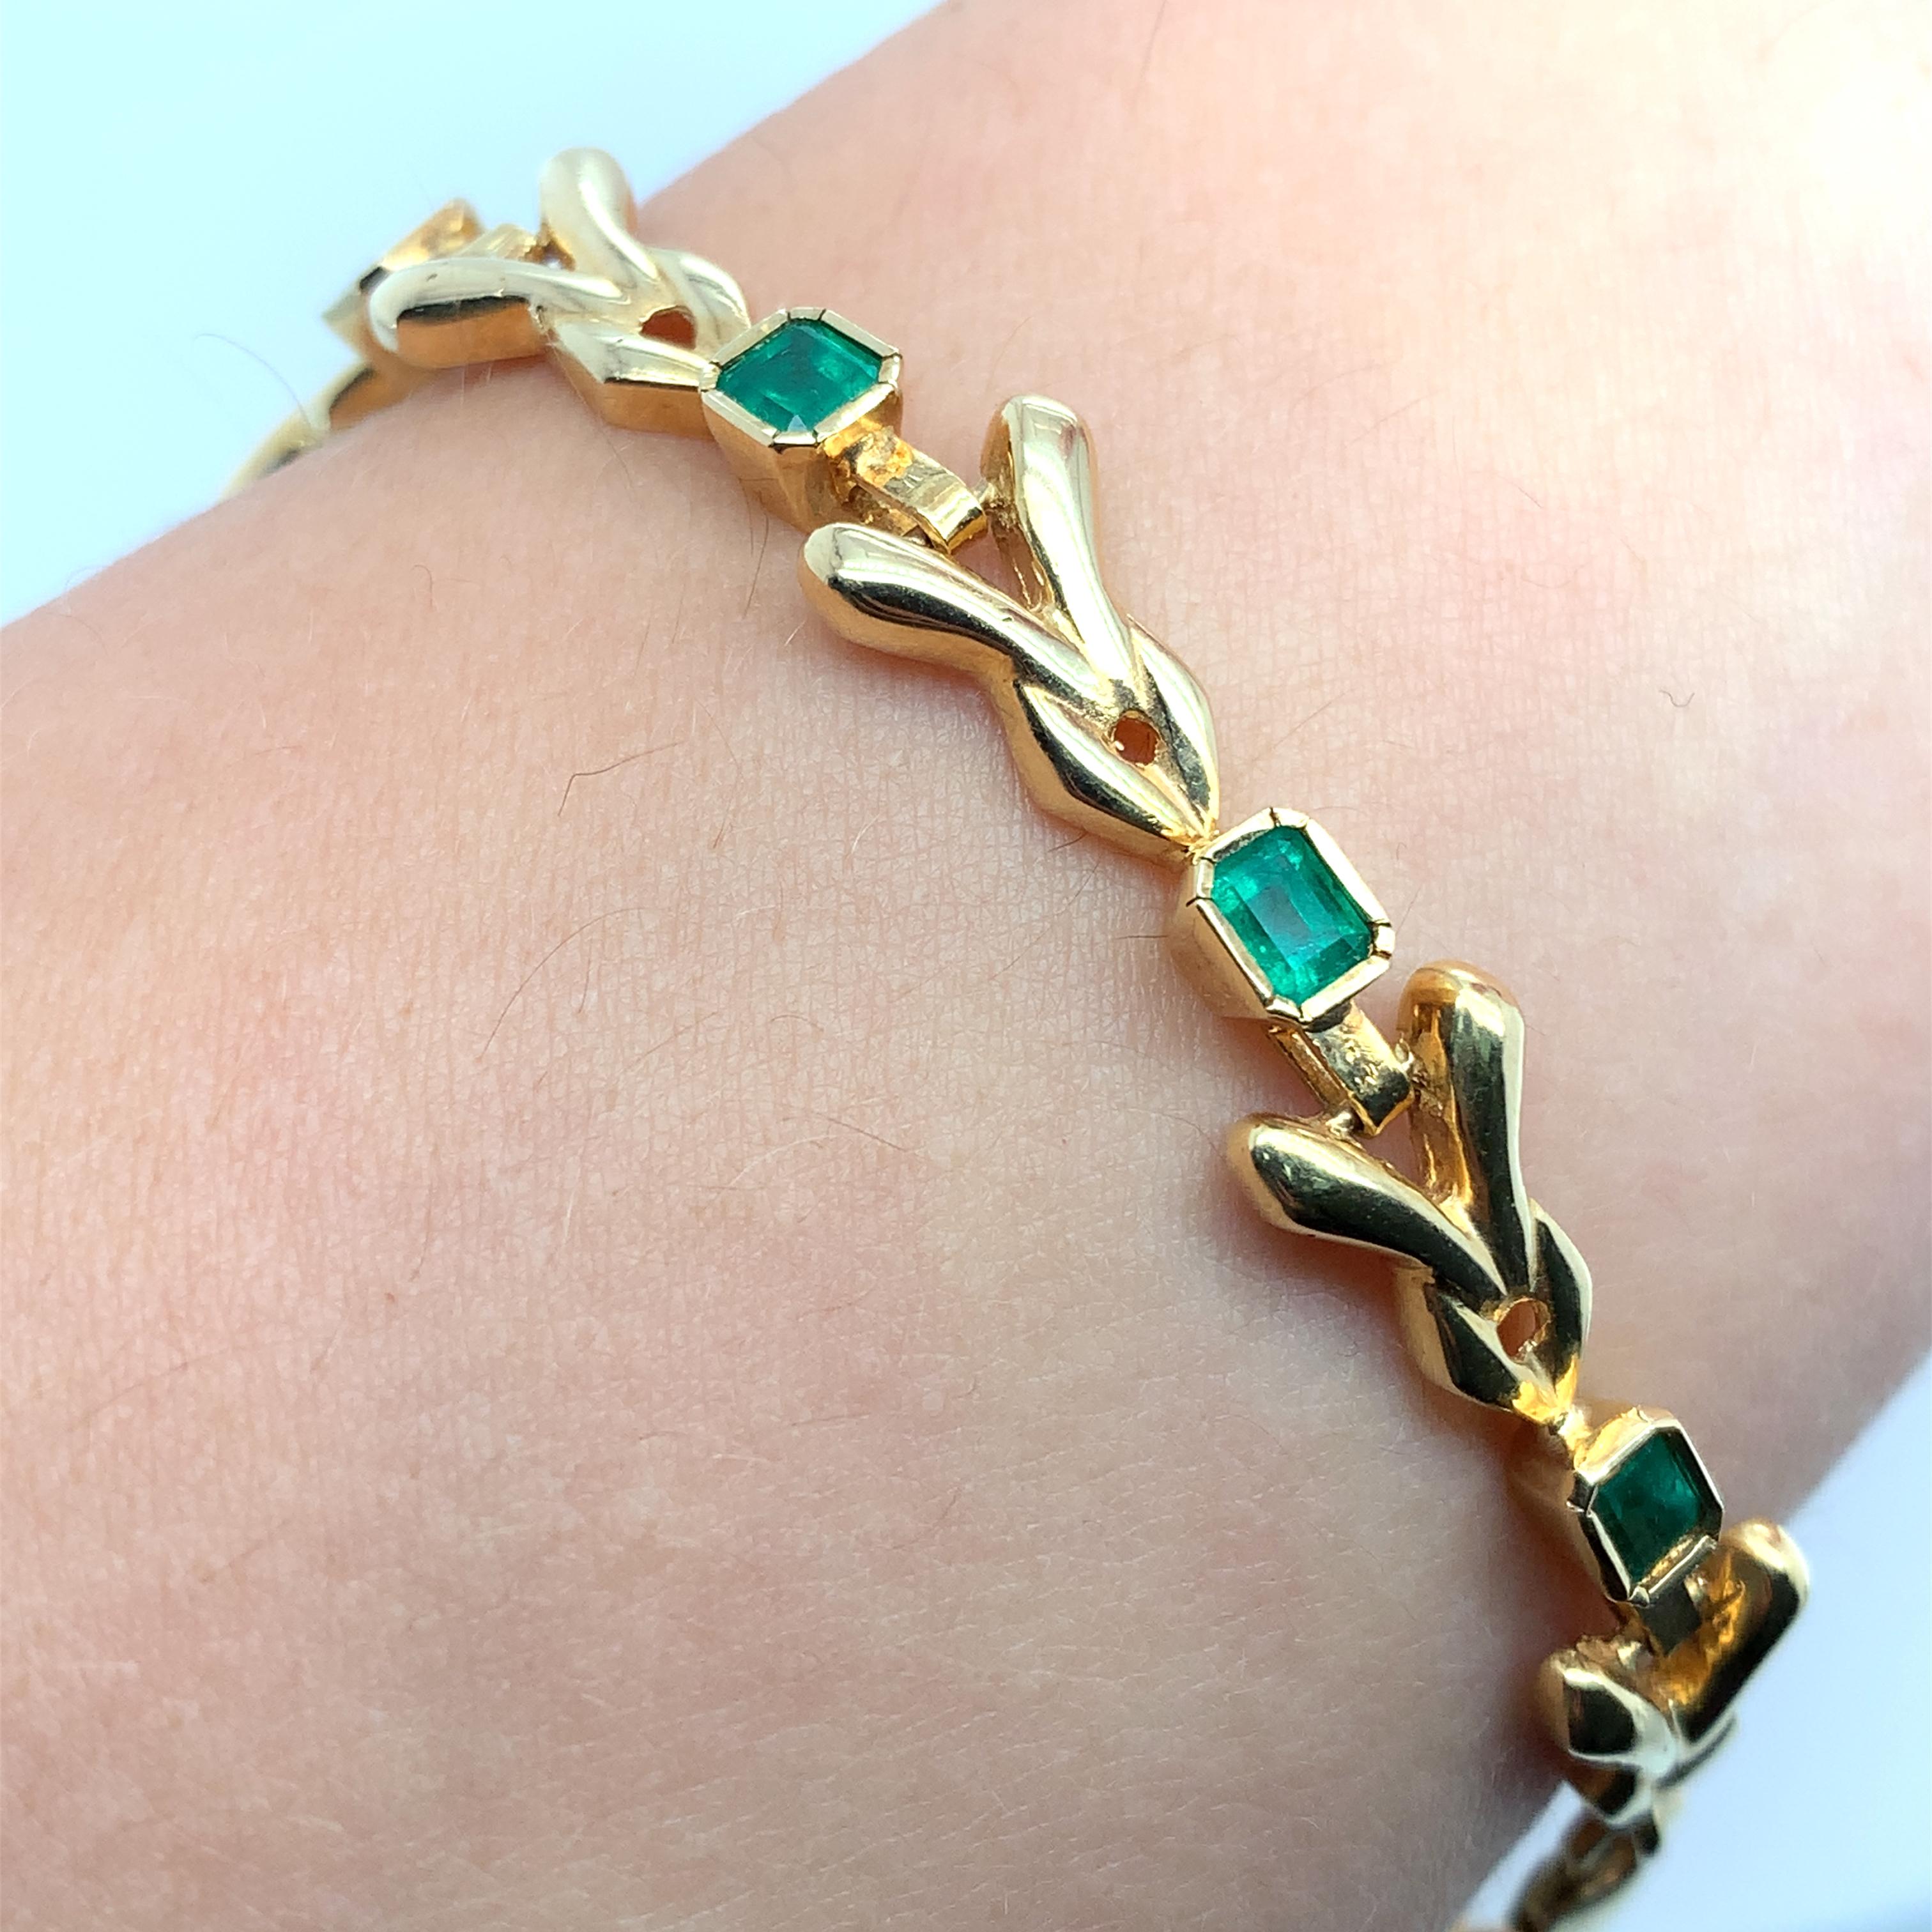 Gorgeous Colombian green emerald tennis bracelet in 18k yellow gold.
Composed of 2.40ct natural green Colombian green emerald gemstone cushion shaped bezel rubover setting each stone.
The total weight of the bracelet 15.4 grams
Colombian green